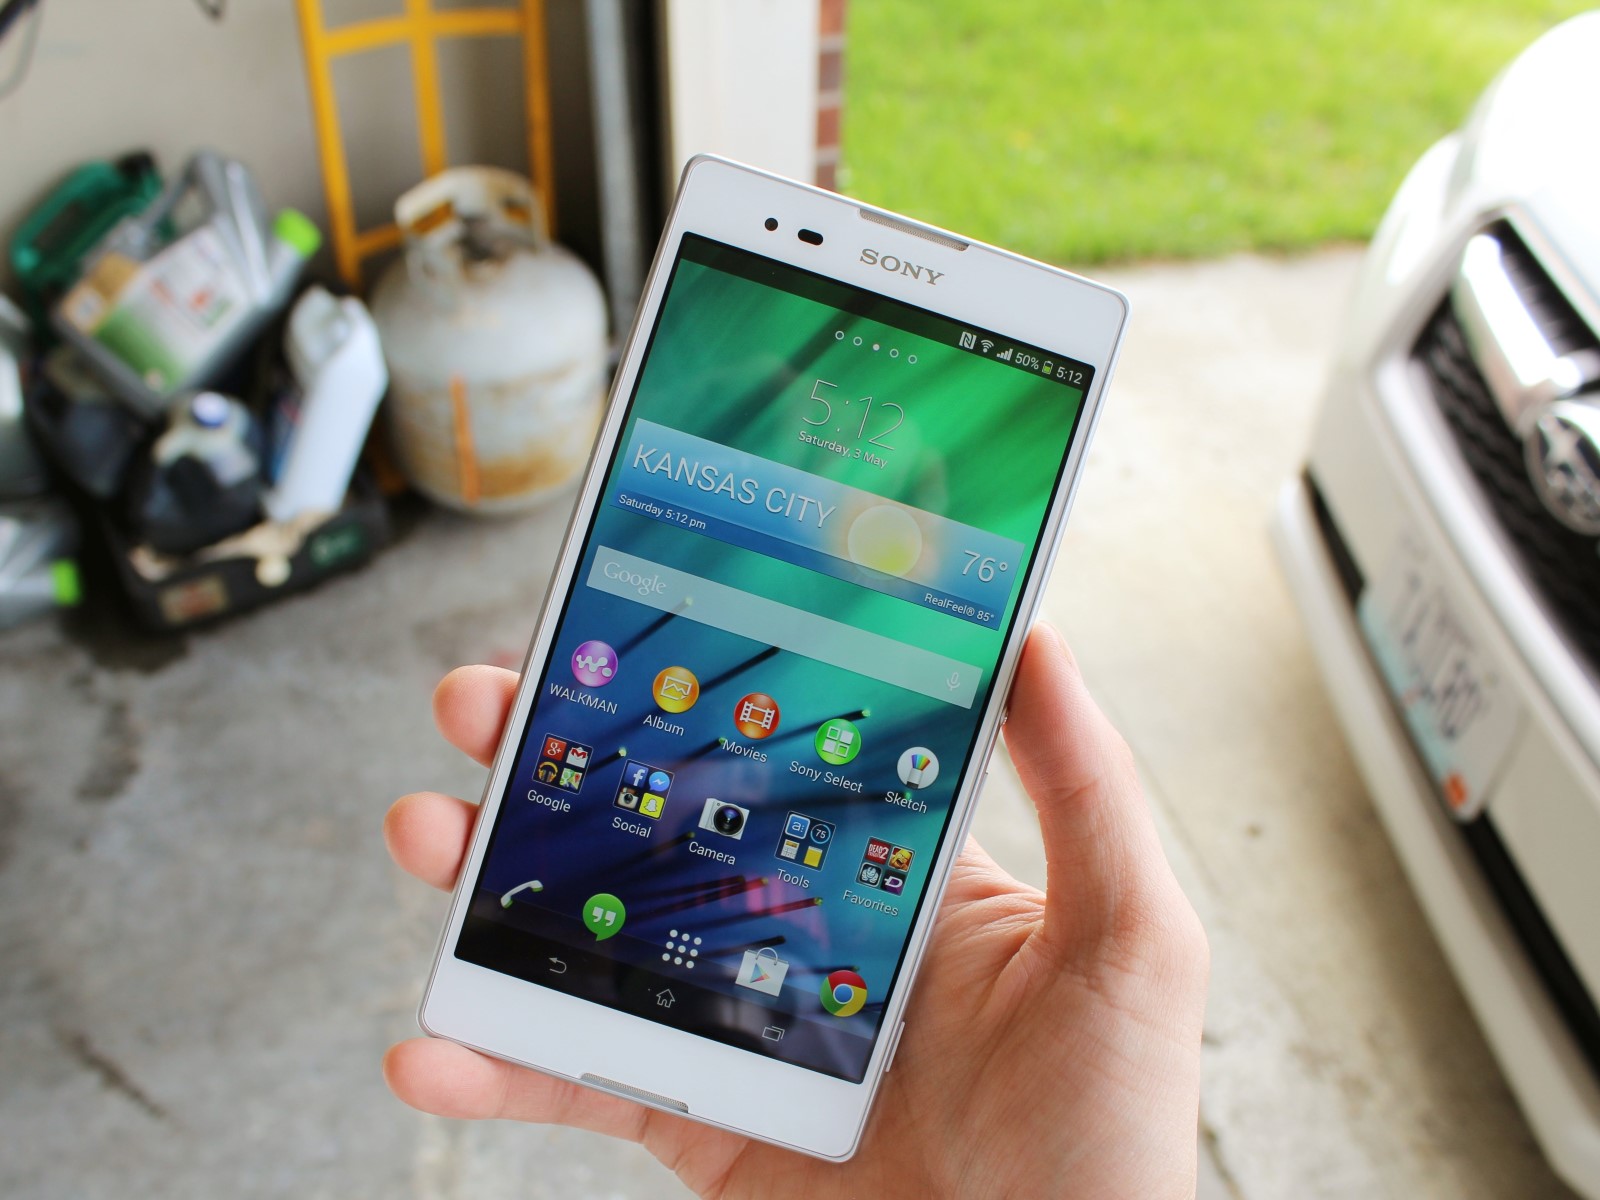 Xperia T2 Ultra Configuration For Net10 Networks: A Guide